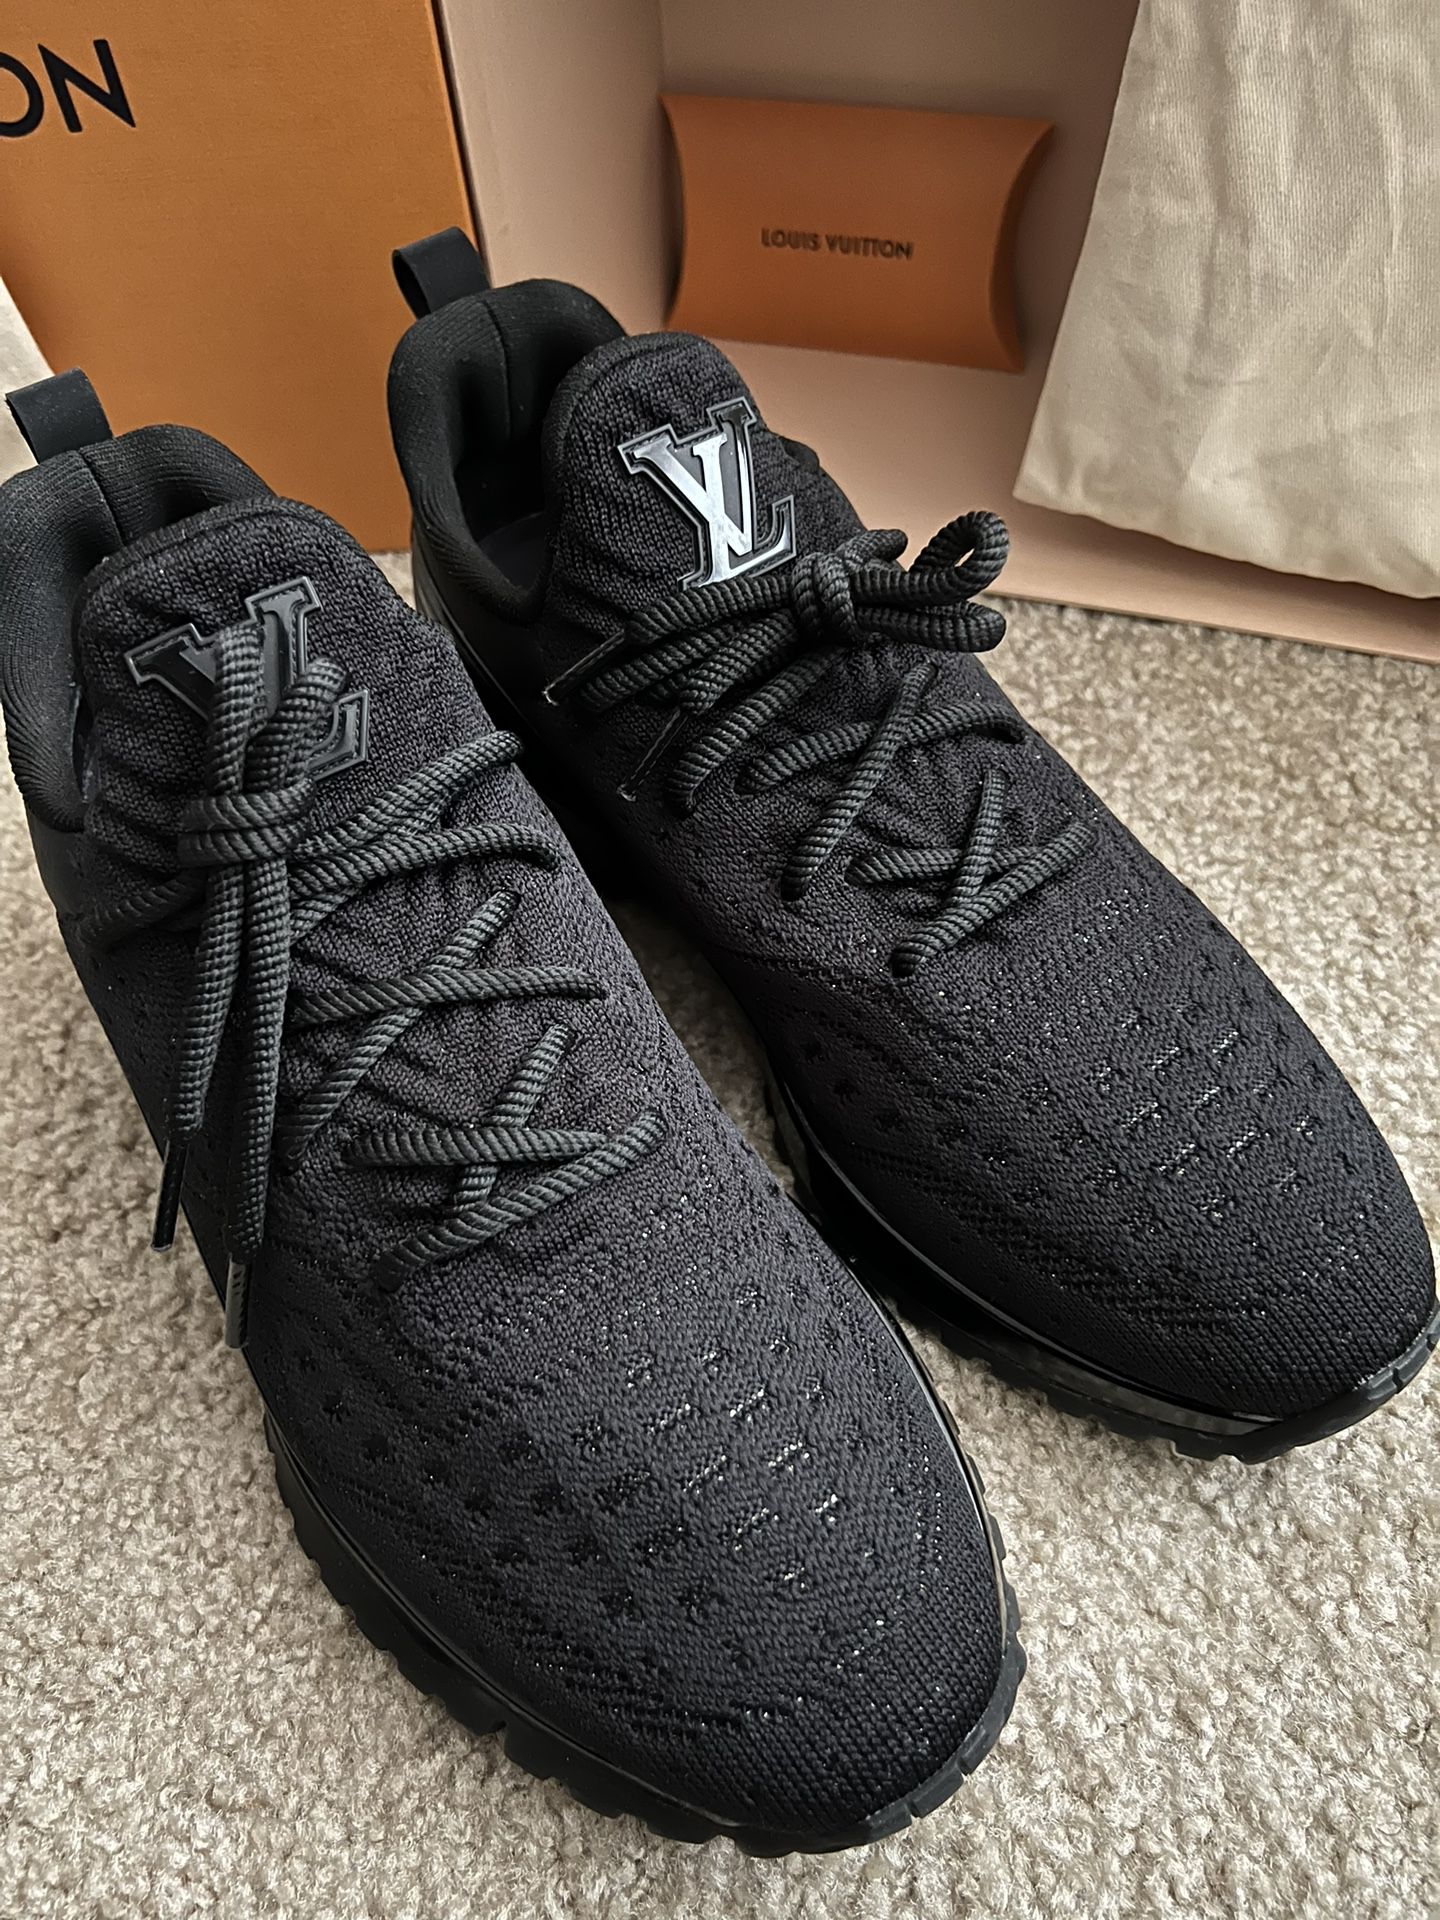 Authentic Black Louis Vuitton VNR Knit Sneakers for Sale in